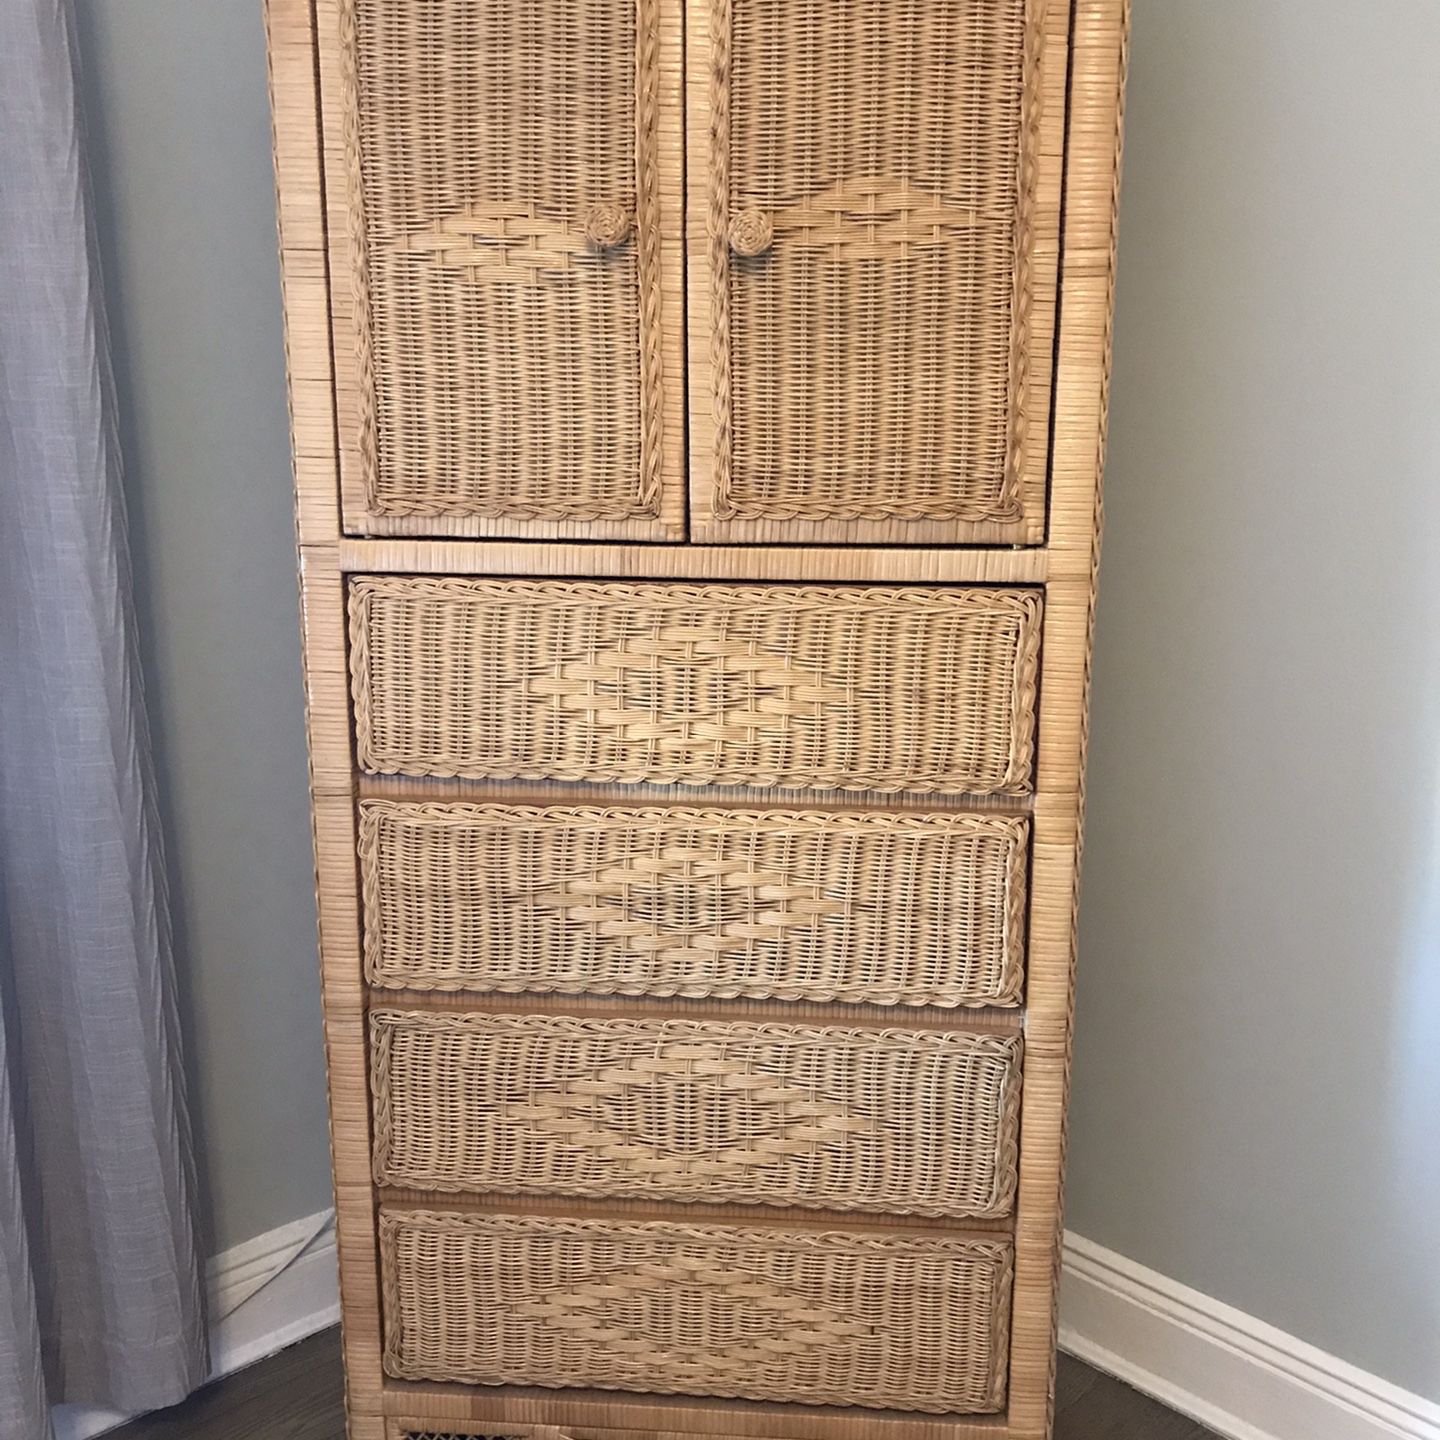 Wicker Bedroom Furniture For Sale In Copiague Ny Offerup